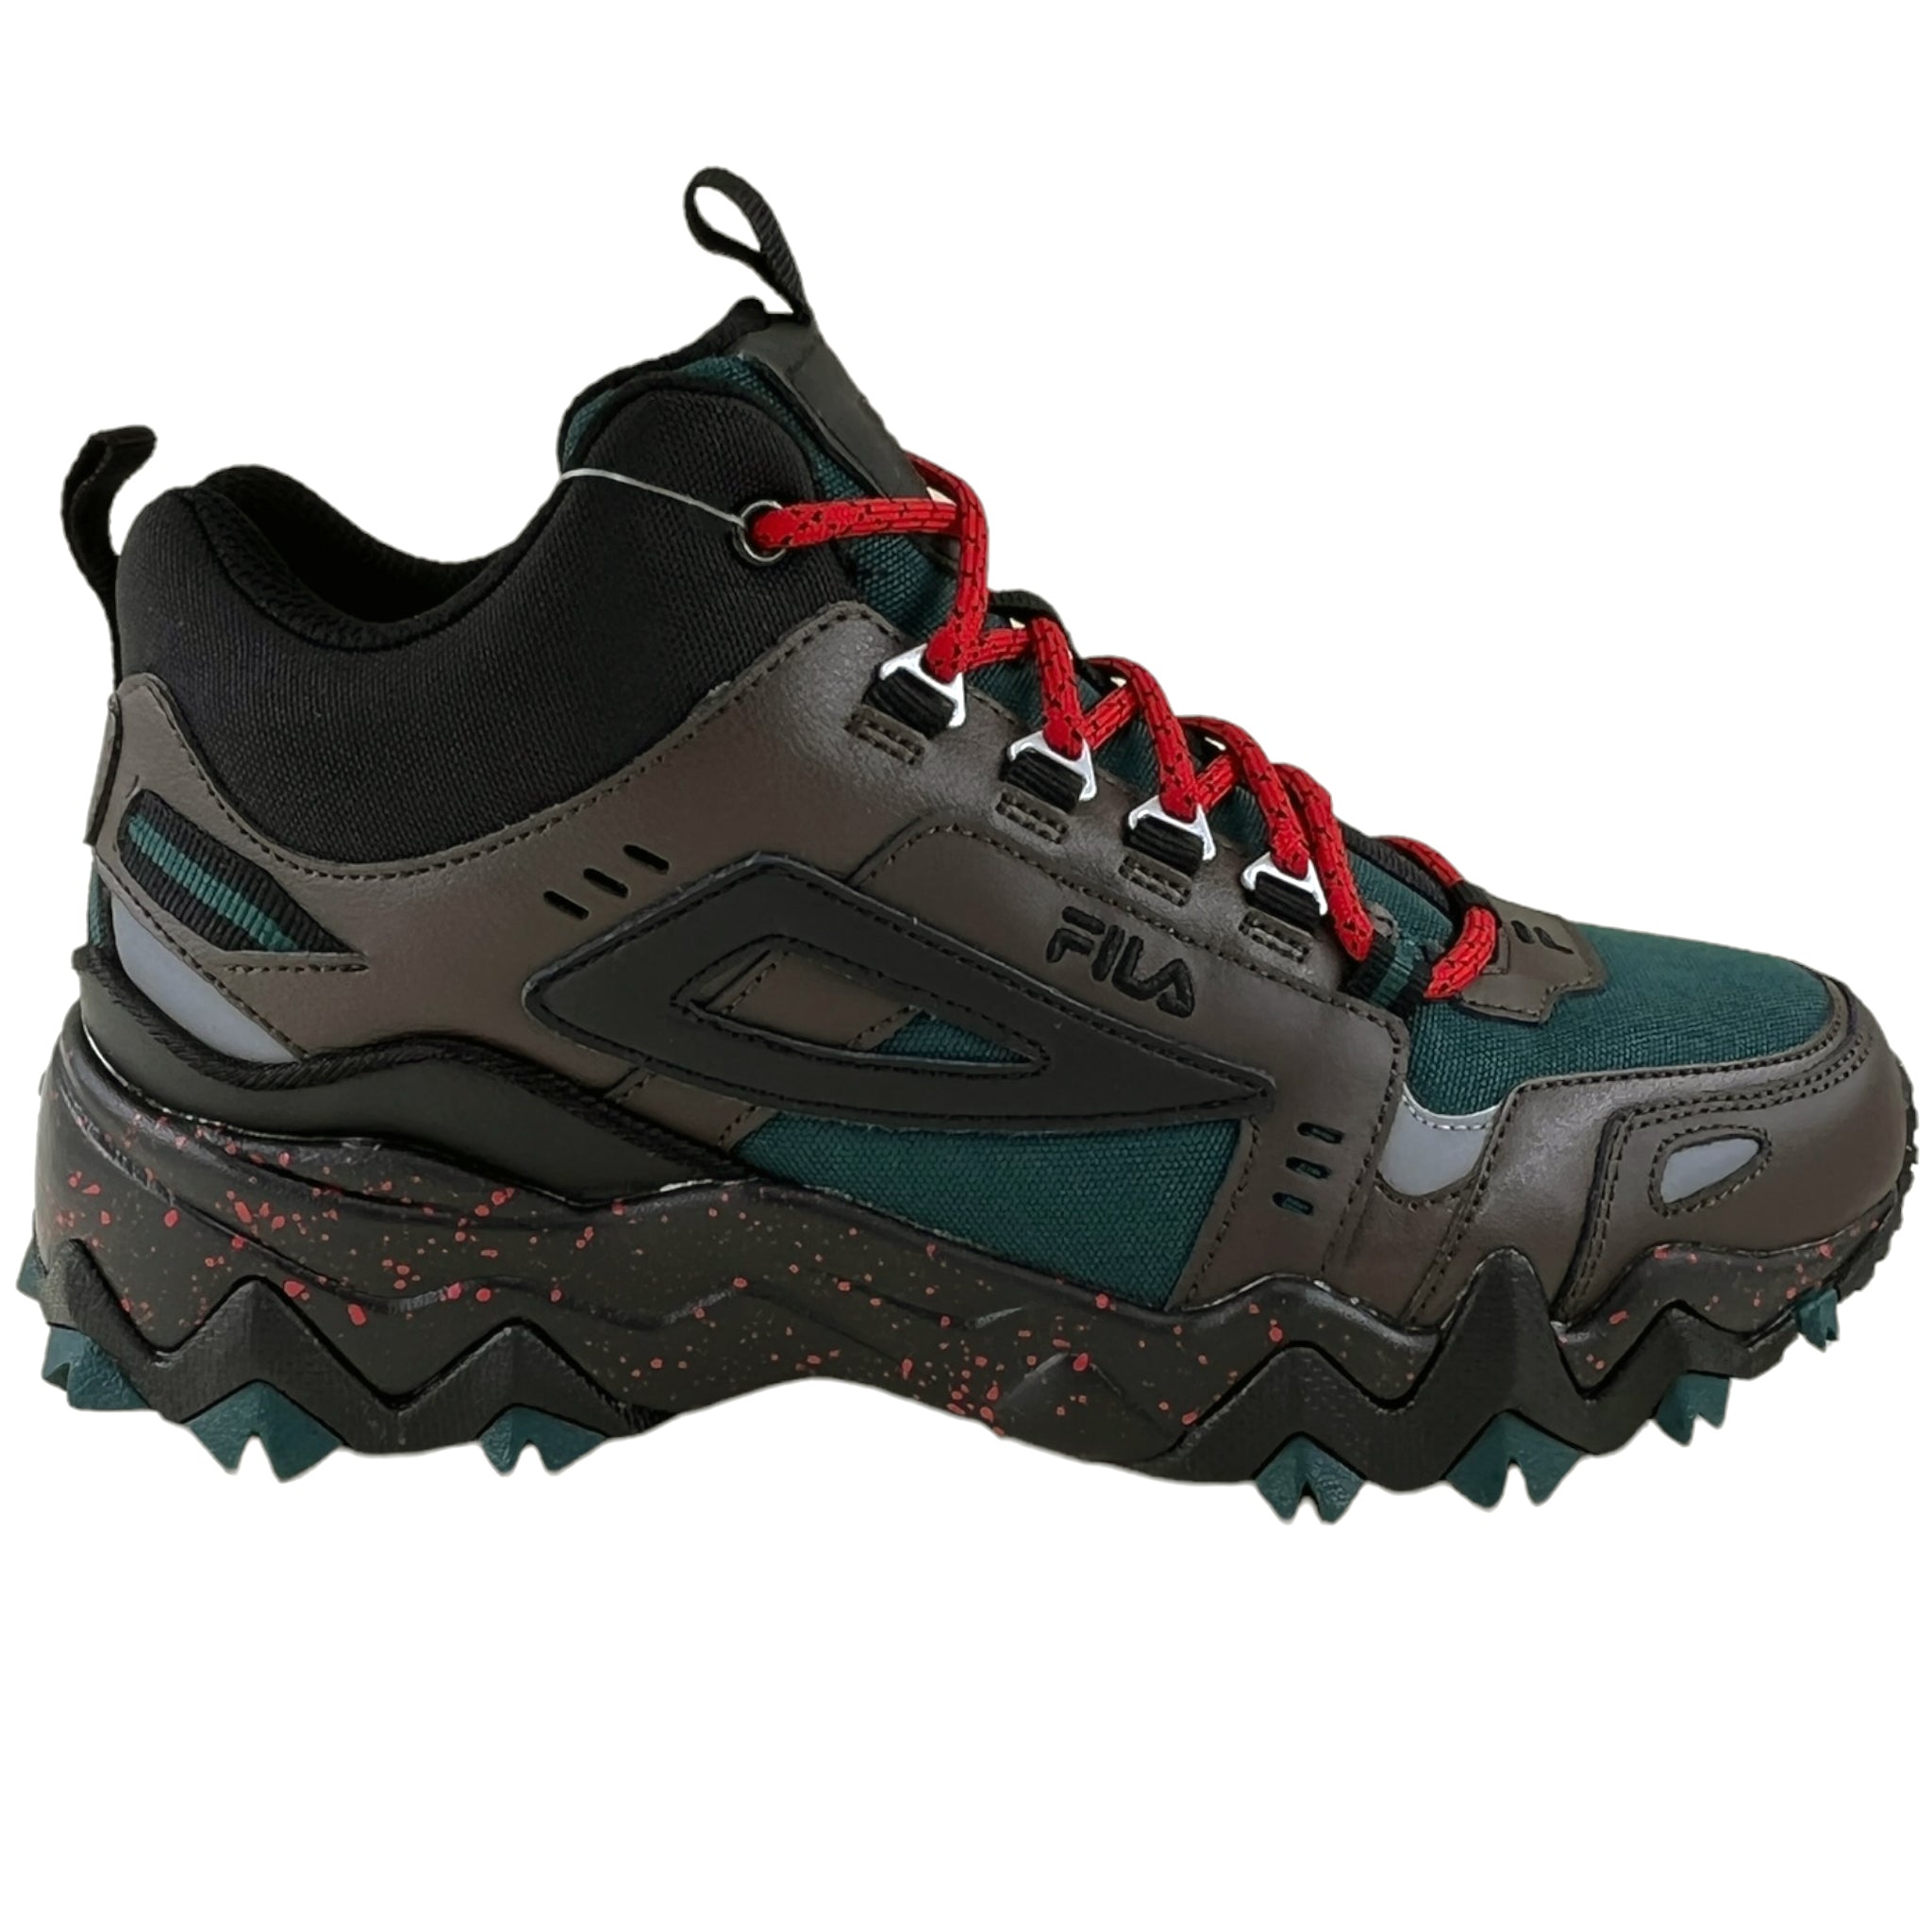 Fila Men's Oakmont TR Mid Trail Running Shoes – That Shoe and More